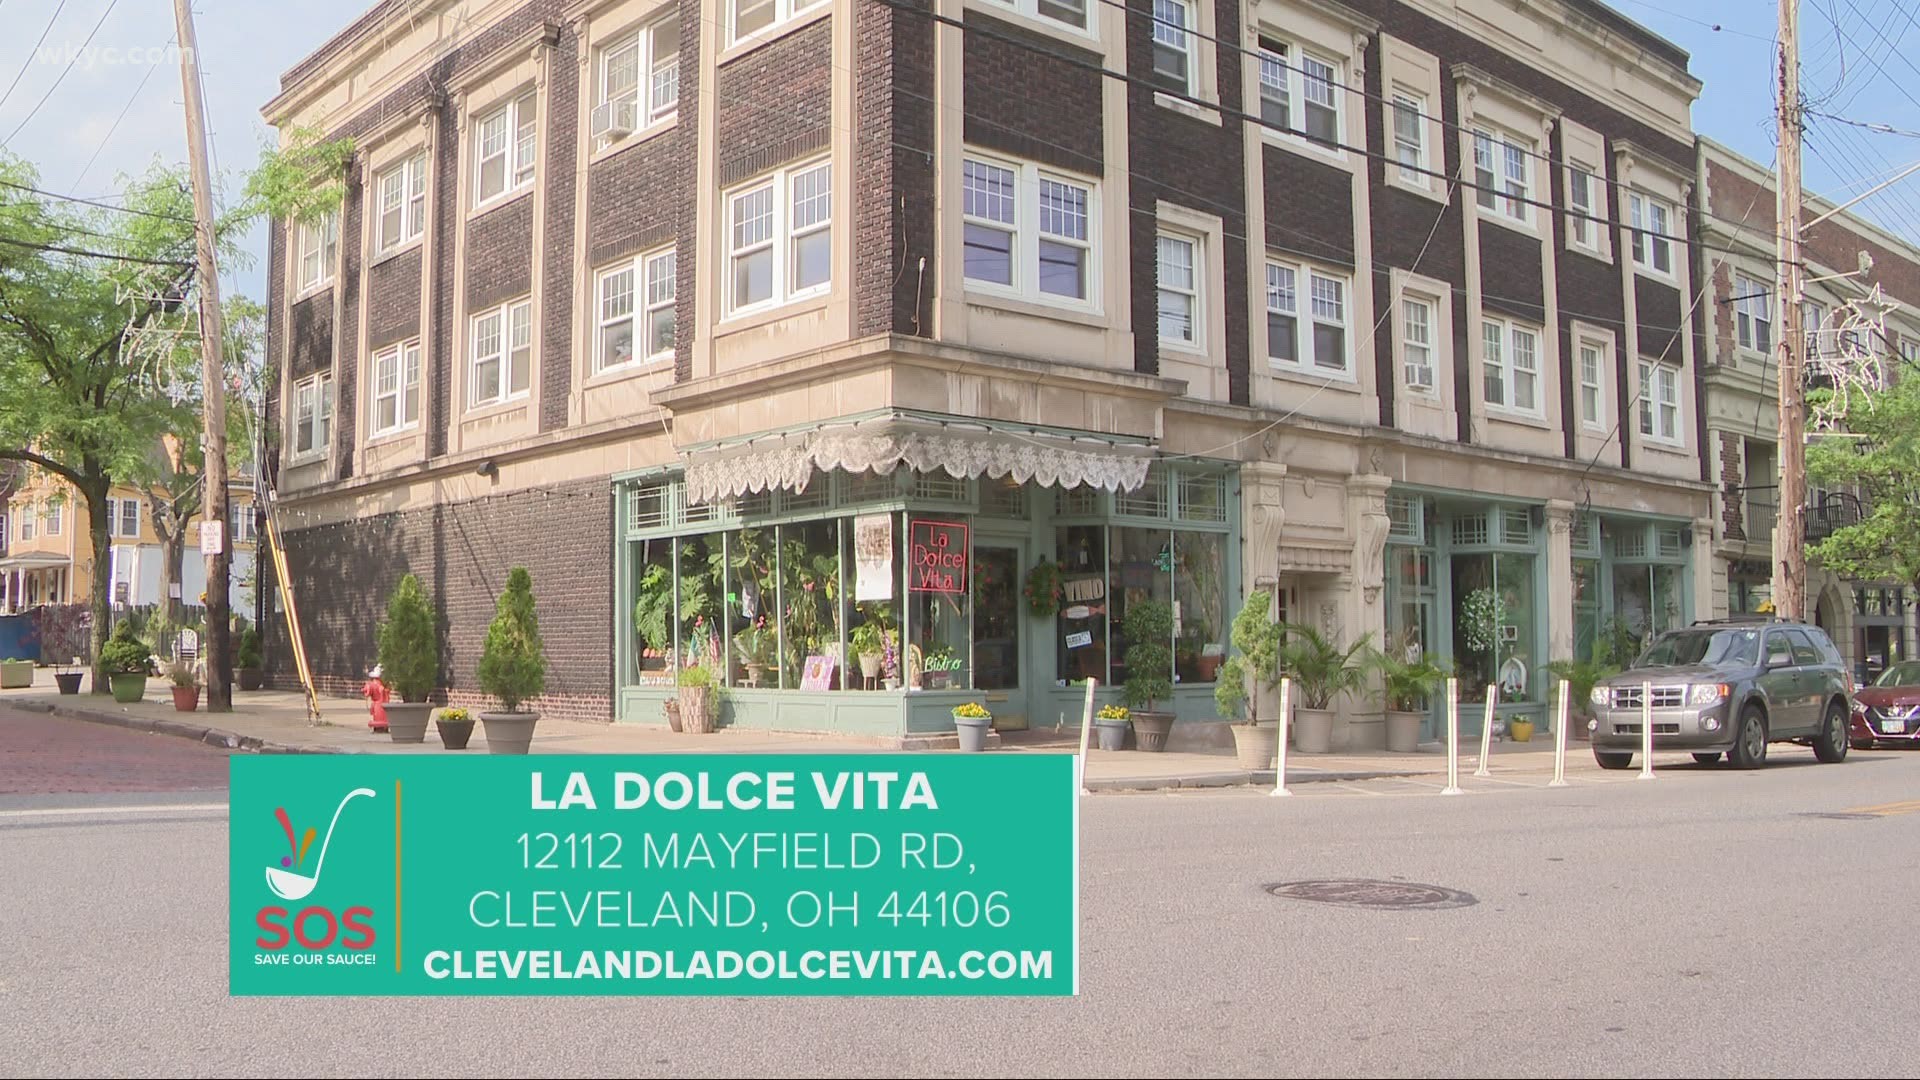 Looking for the best patios in Cleveland? Look no further than La Dolce Vita in Little Italy.